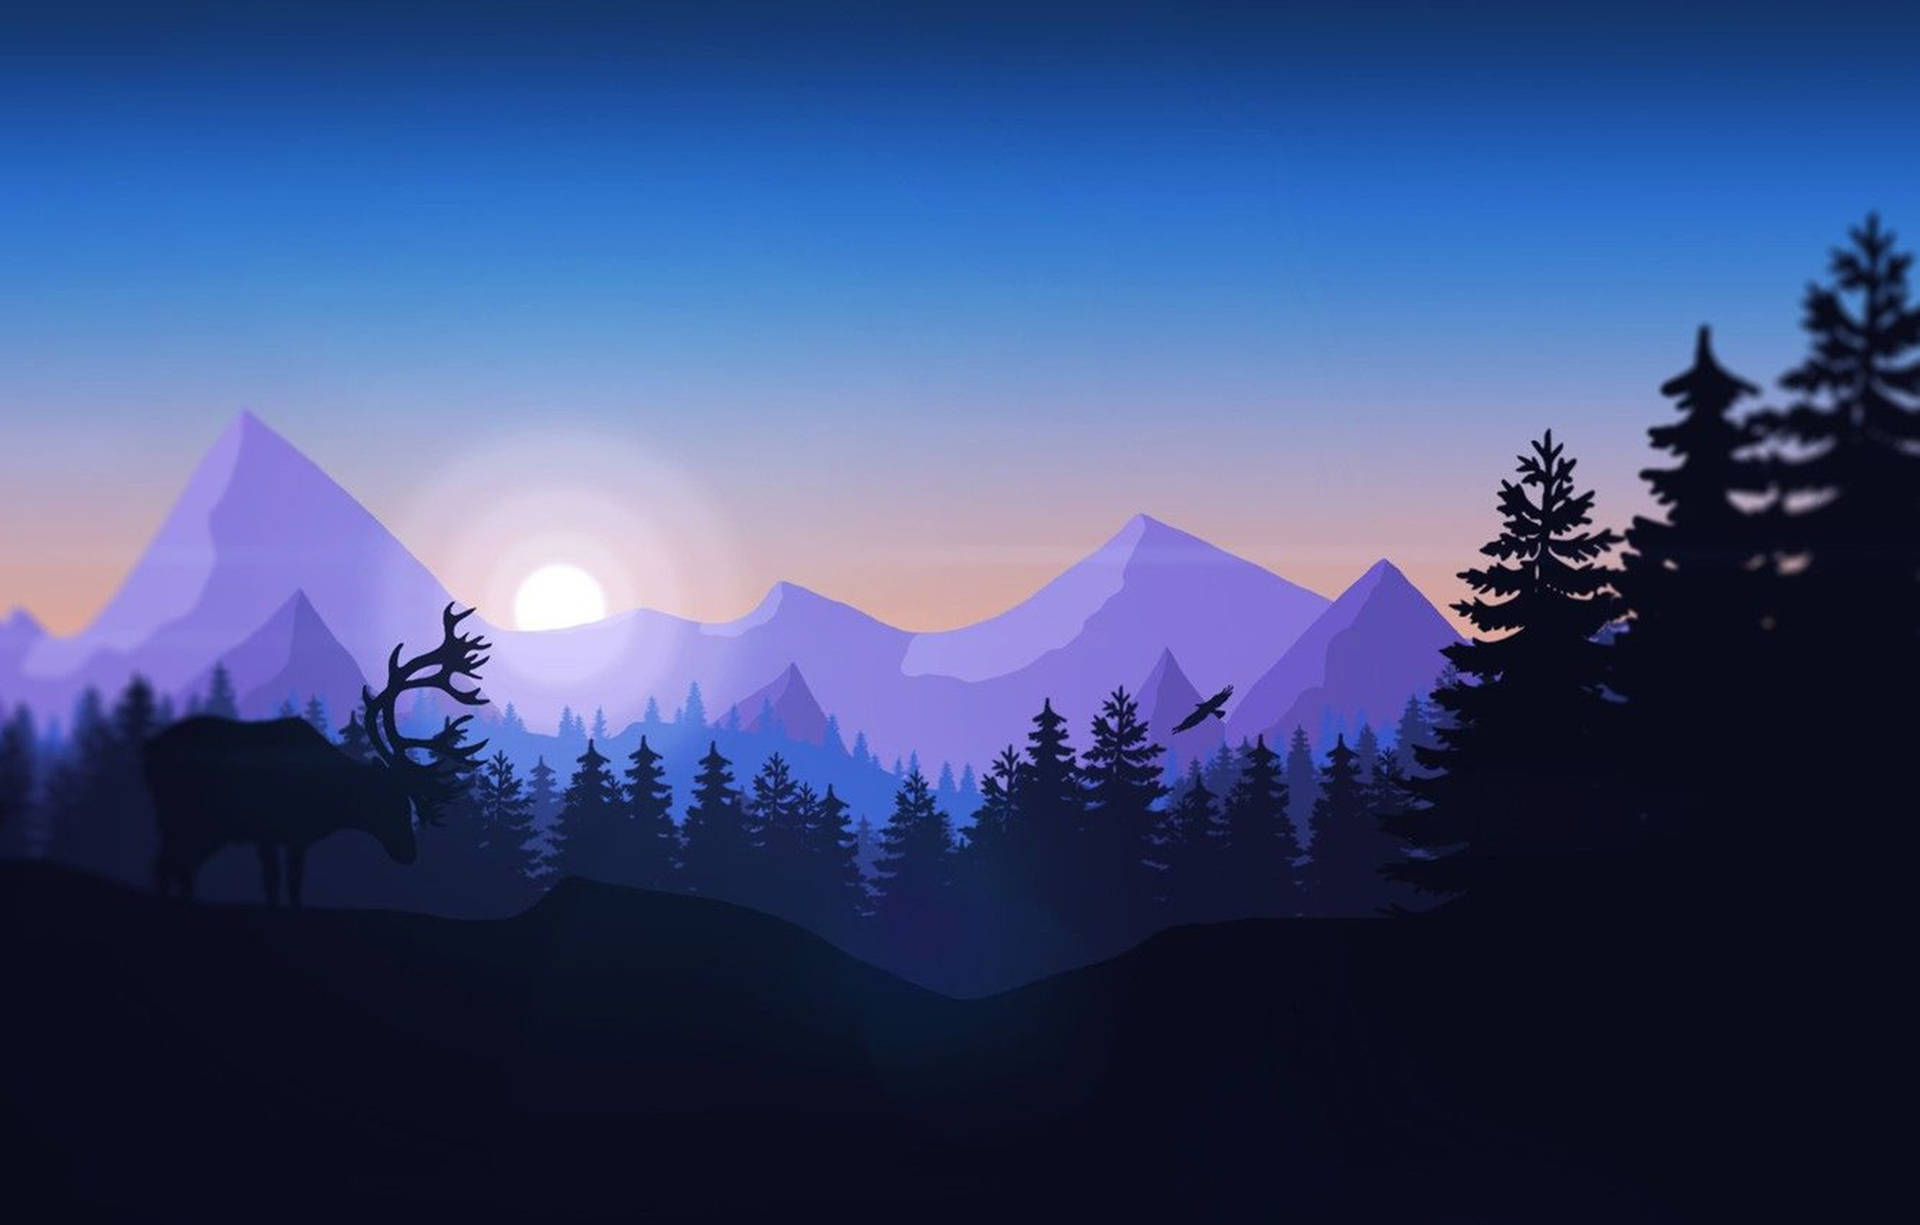 4K Firewatch Bowing Deer Against Lavender Mountains Wallpaper